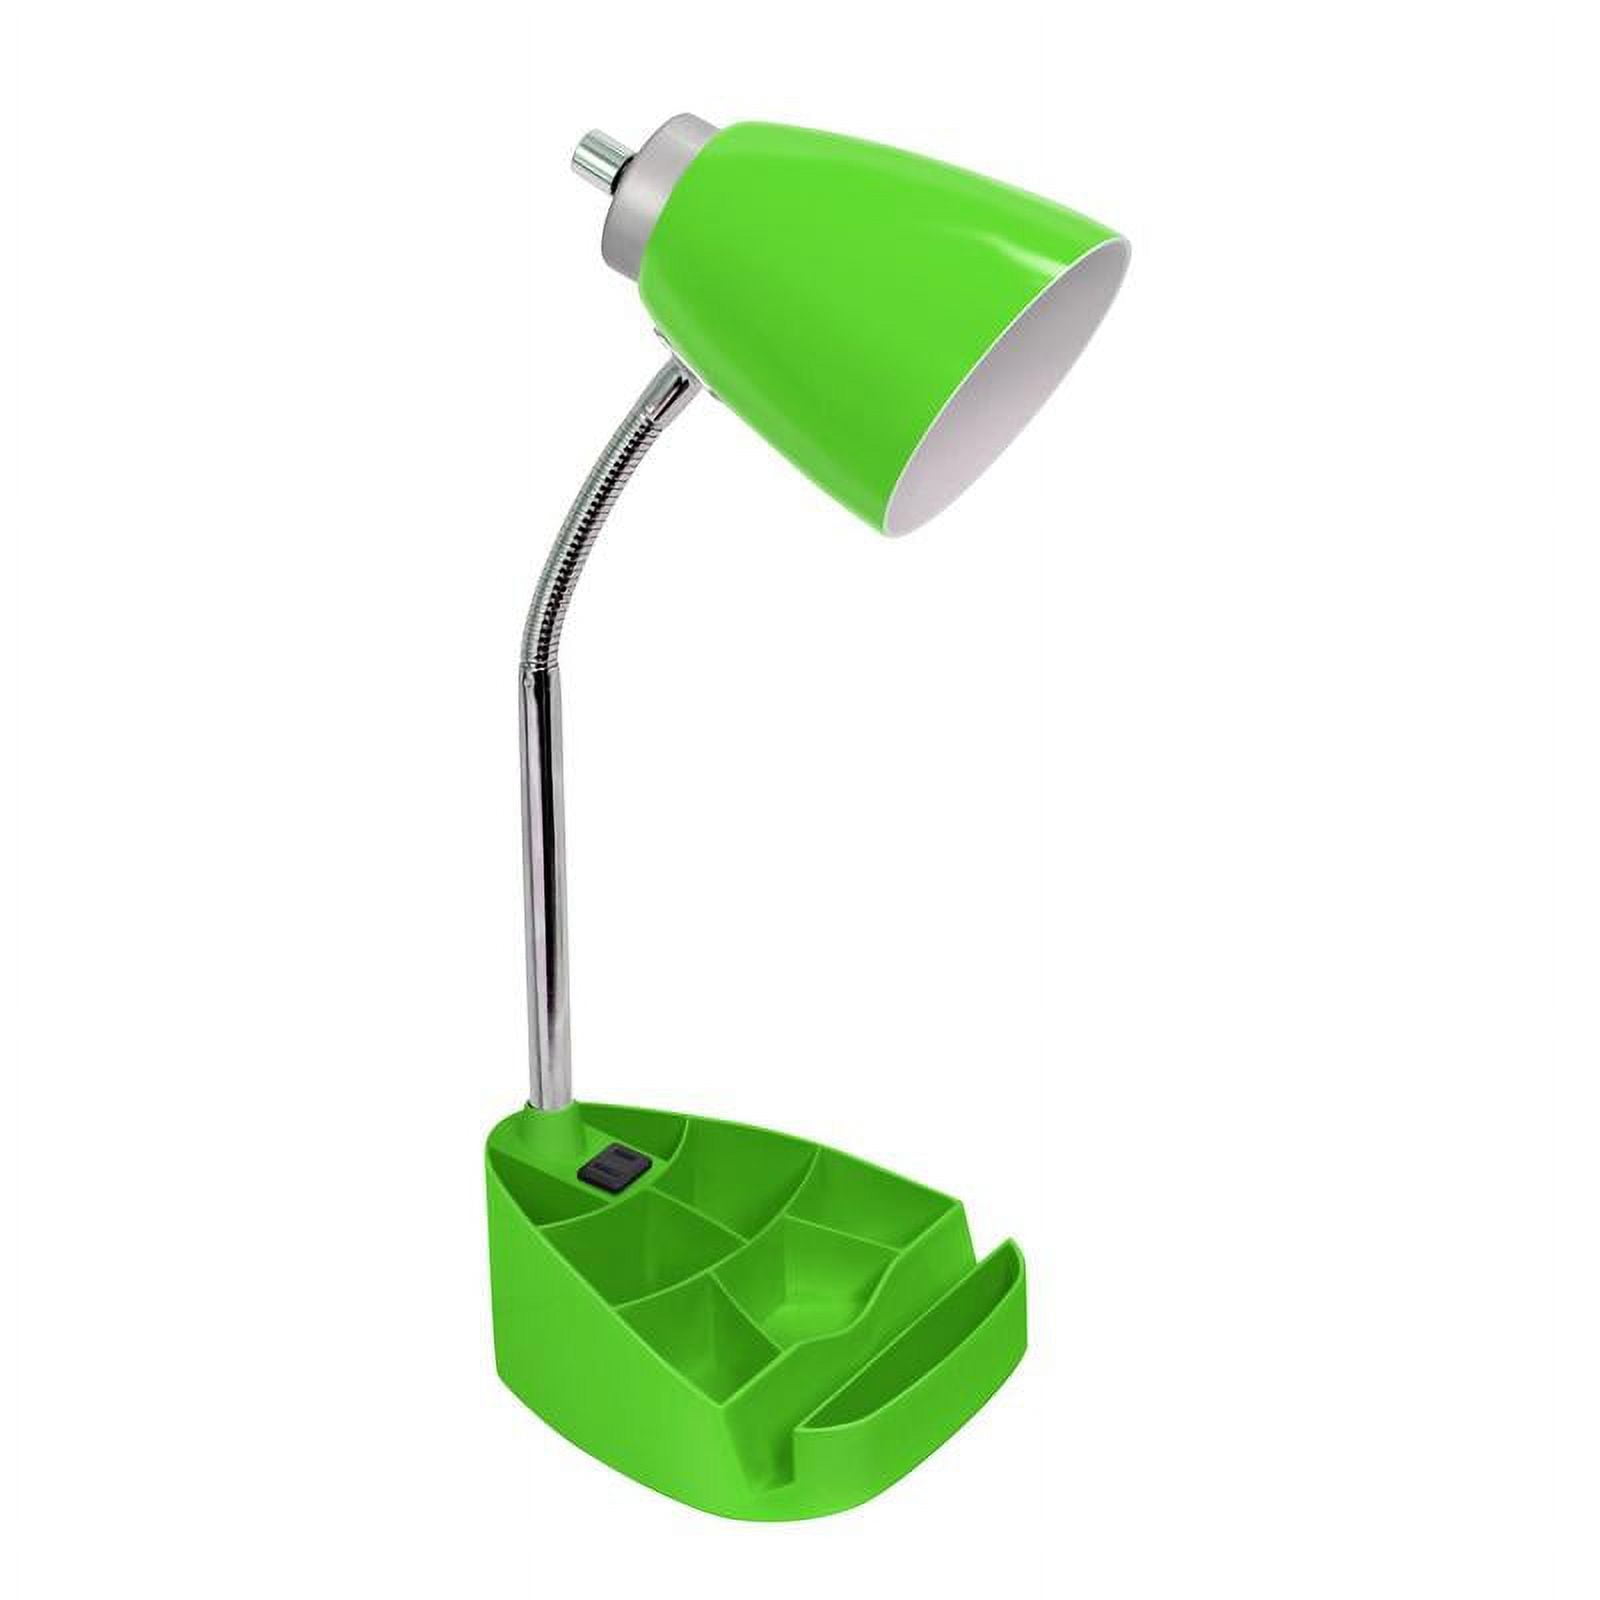 Gooseneck Organizer Desk Lamp With Ipad Tablet Stand Book Holder & Charging Outlet, Green